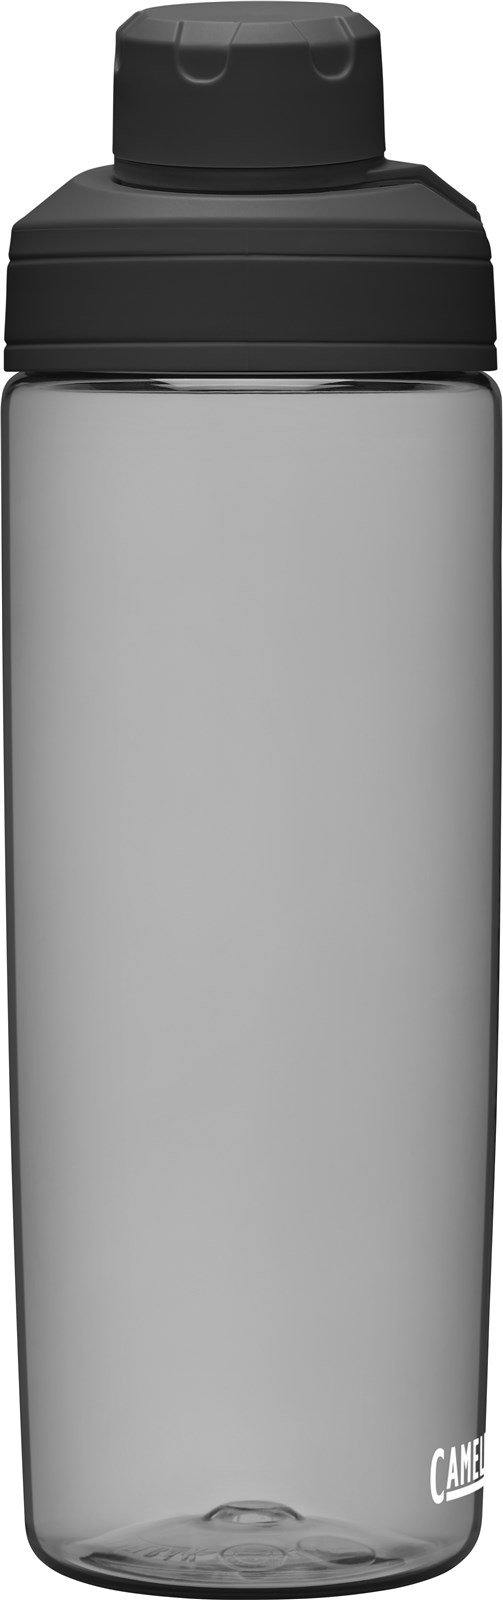 Chute Mag Bottle 0.6l charcoal, 21 - MyLiving24